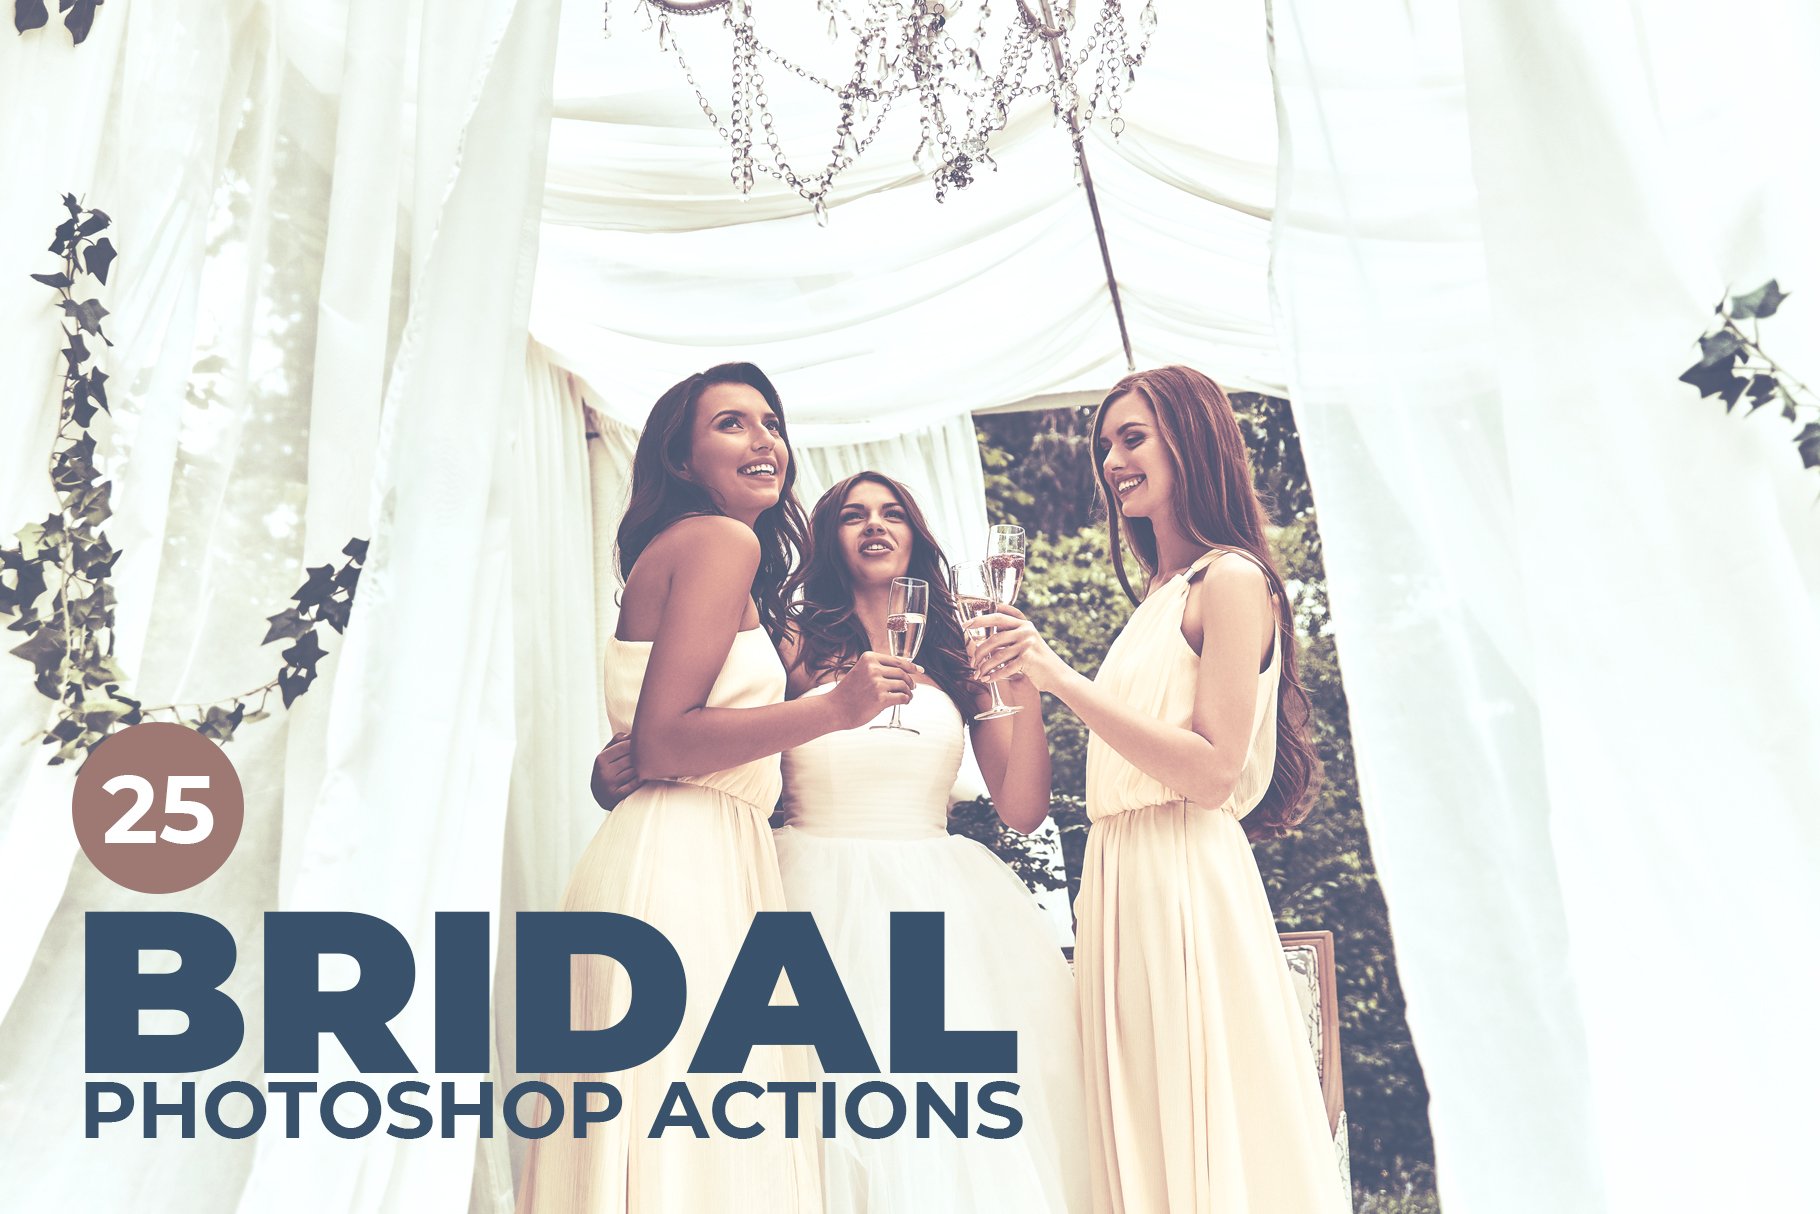 25 Bridal Photoshop Actionspreview image.